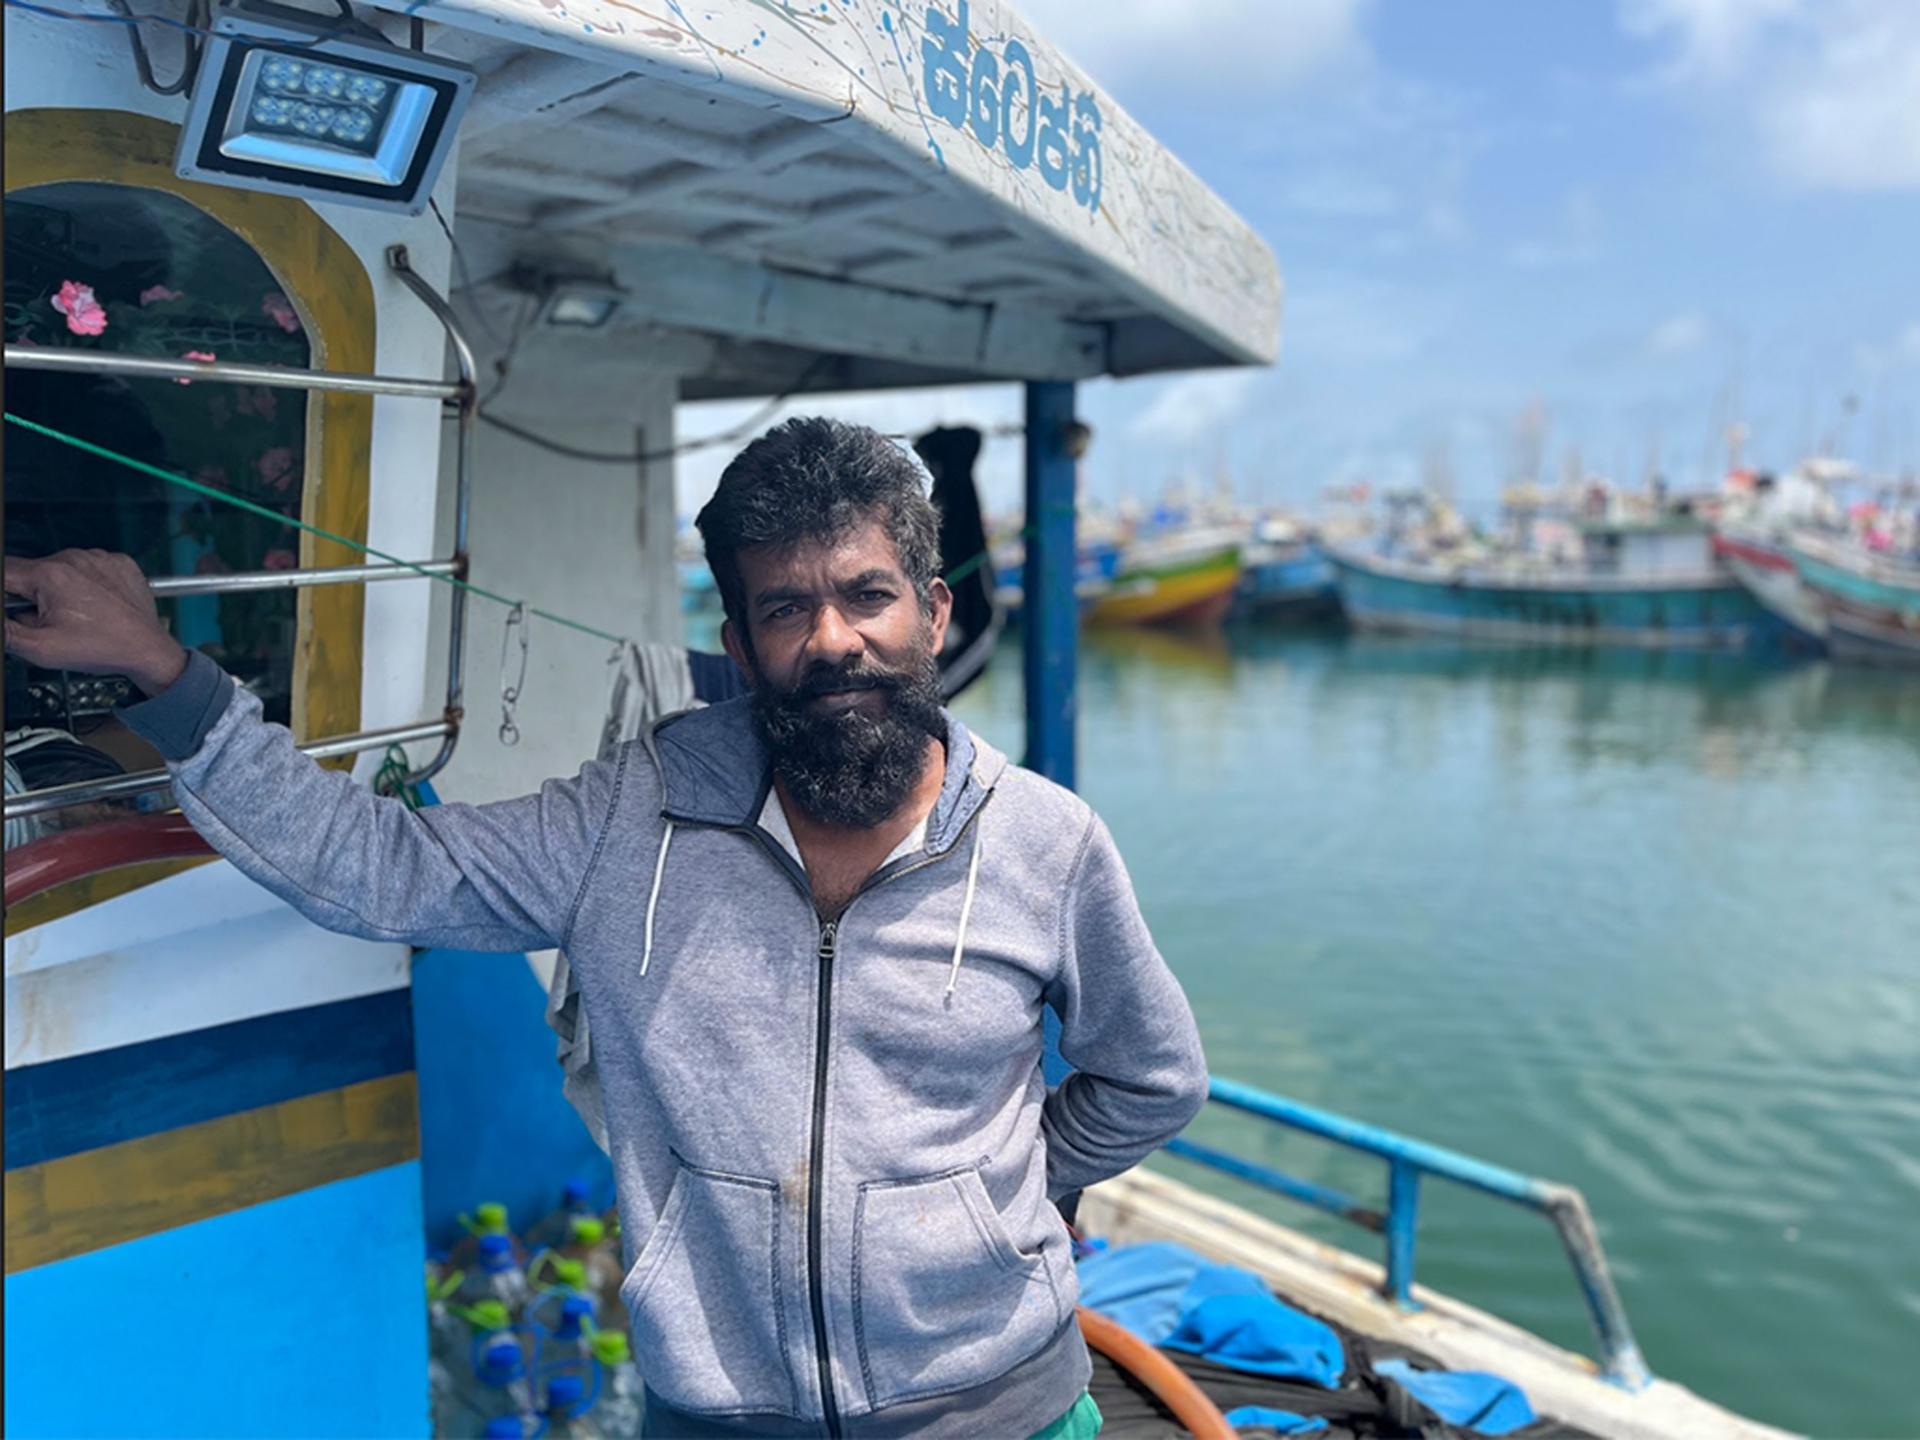 Boat captain Saman Indica says he had to wait 2 1/2 months to fill his fishing boat up with diesel fuel, Sri Lanka.